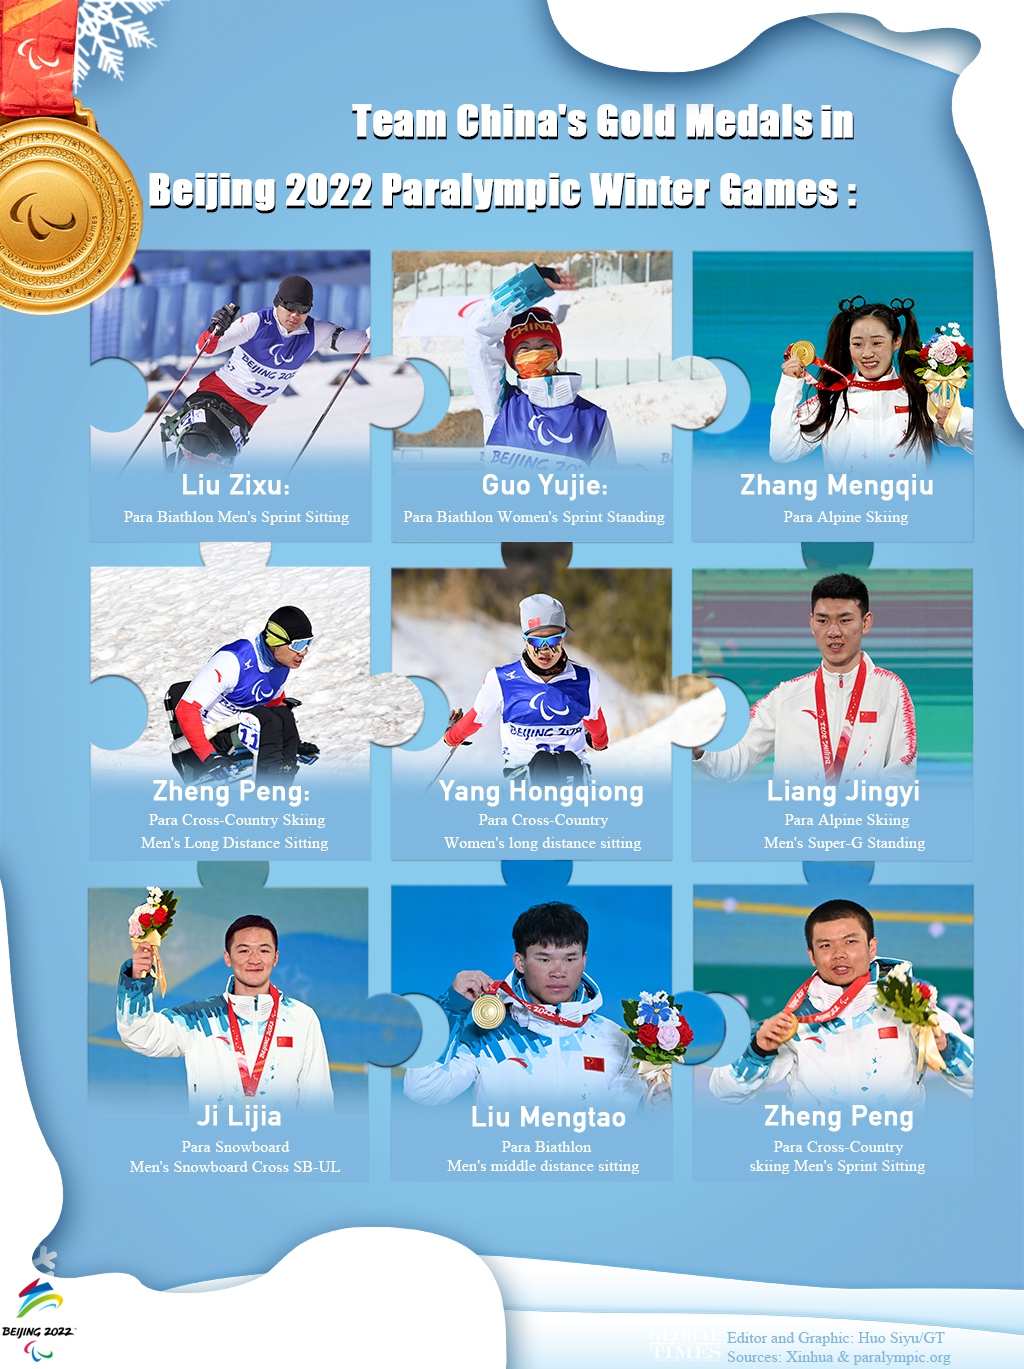 Team China's Gold Medals in Beijing 2022 Paralympic Winter Games. Graphic: Huo Siyu/GT